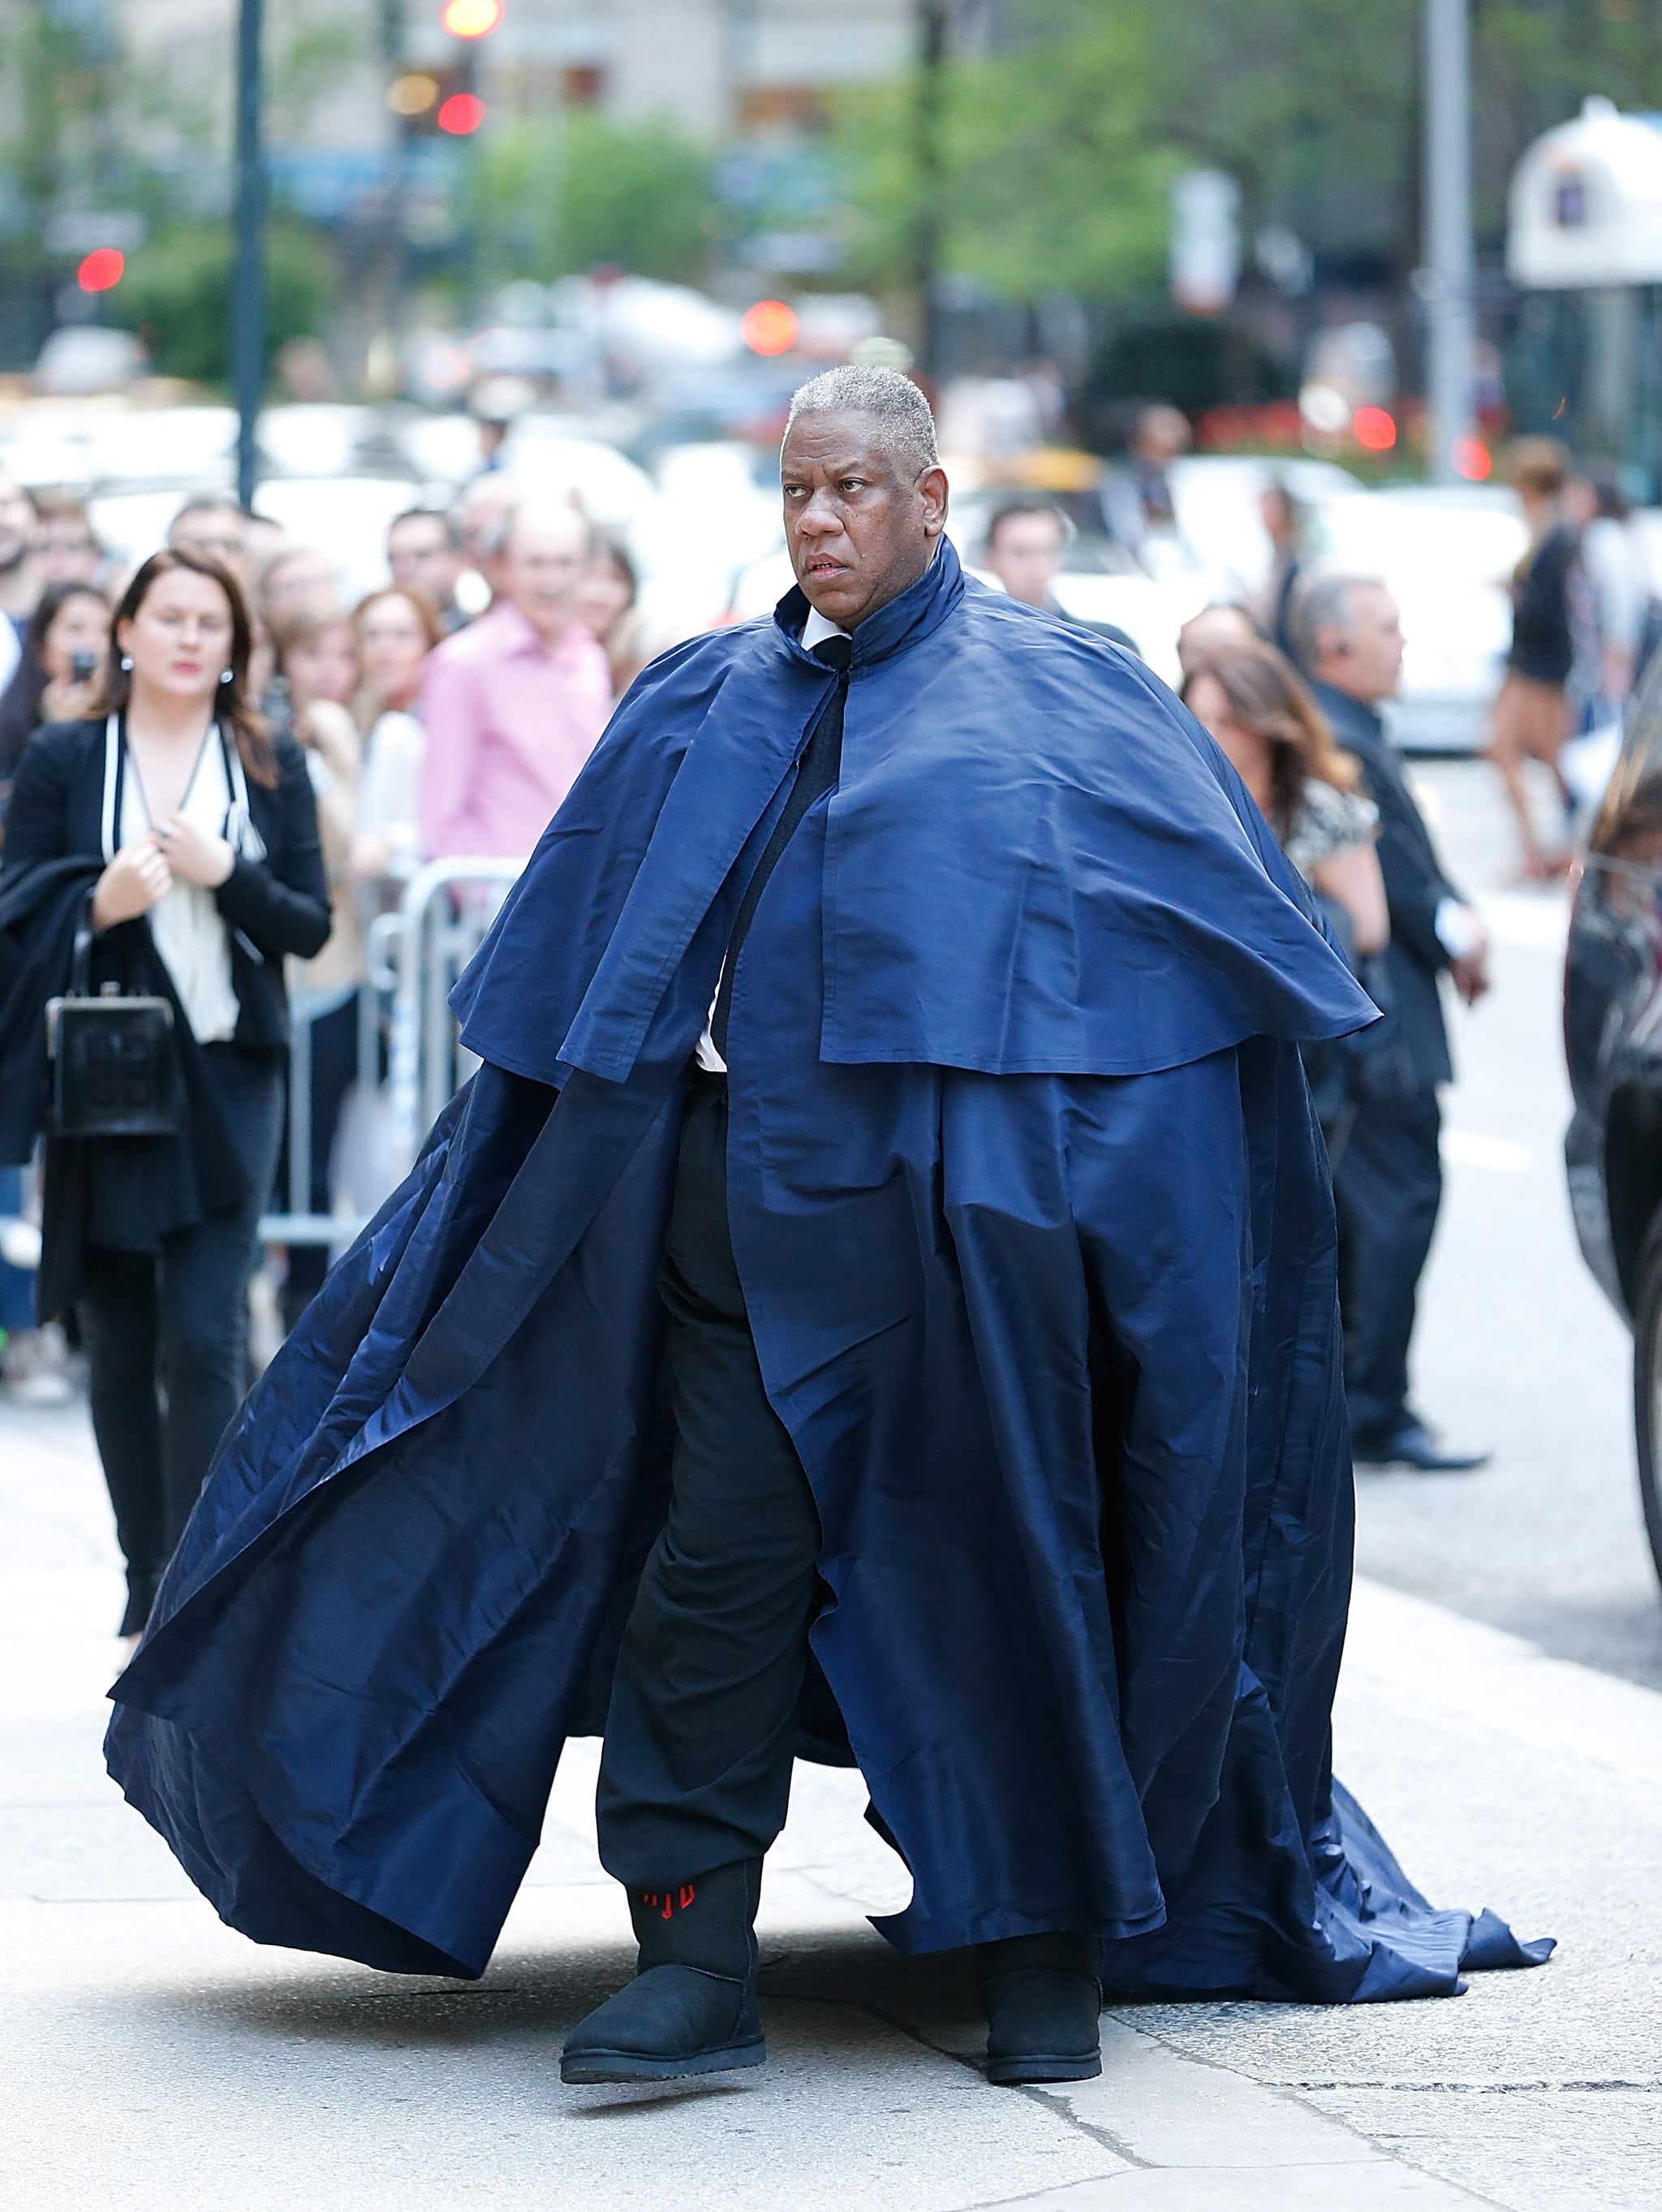 NEW YORK, NY - MAY 02:  Andre Leon Talley attends the memorial service for L'Wren Scott at St. Bartholomew's Church on May 2, 2014 in New York City.  (Photo by John Lamparski/Getty Images)